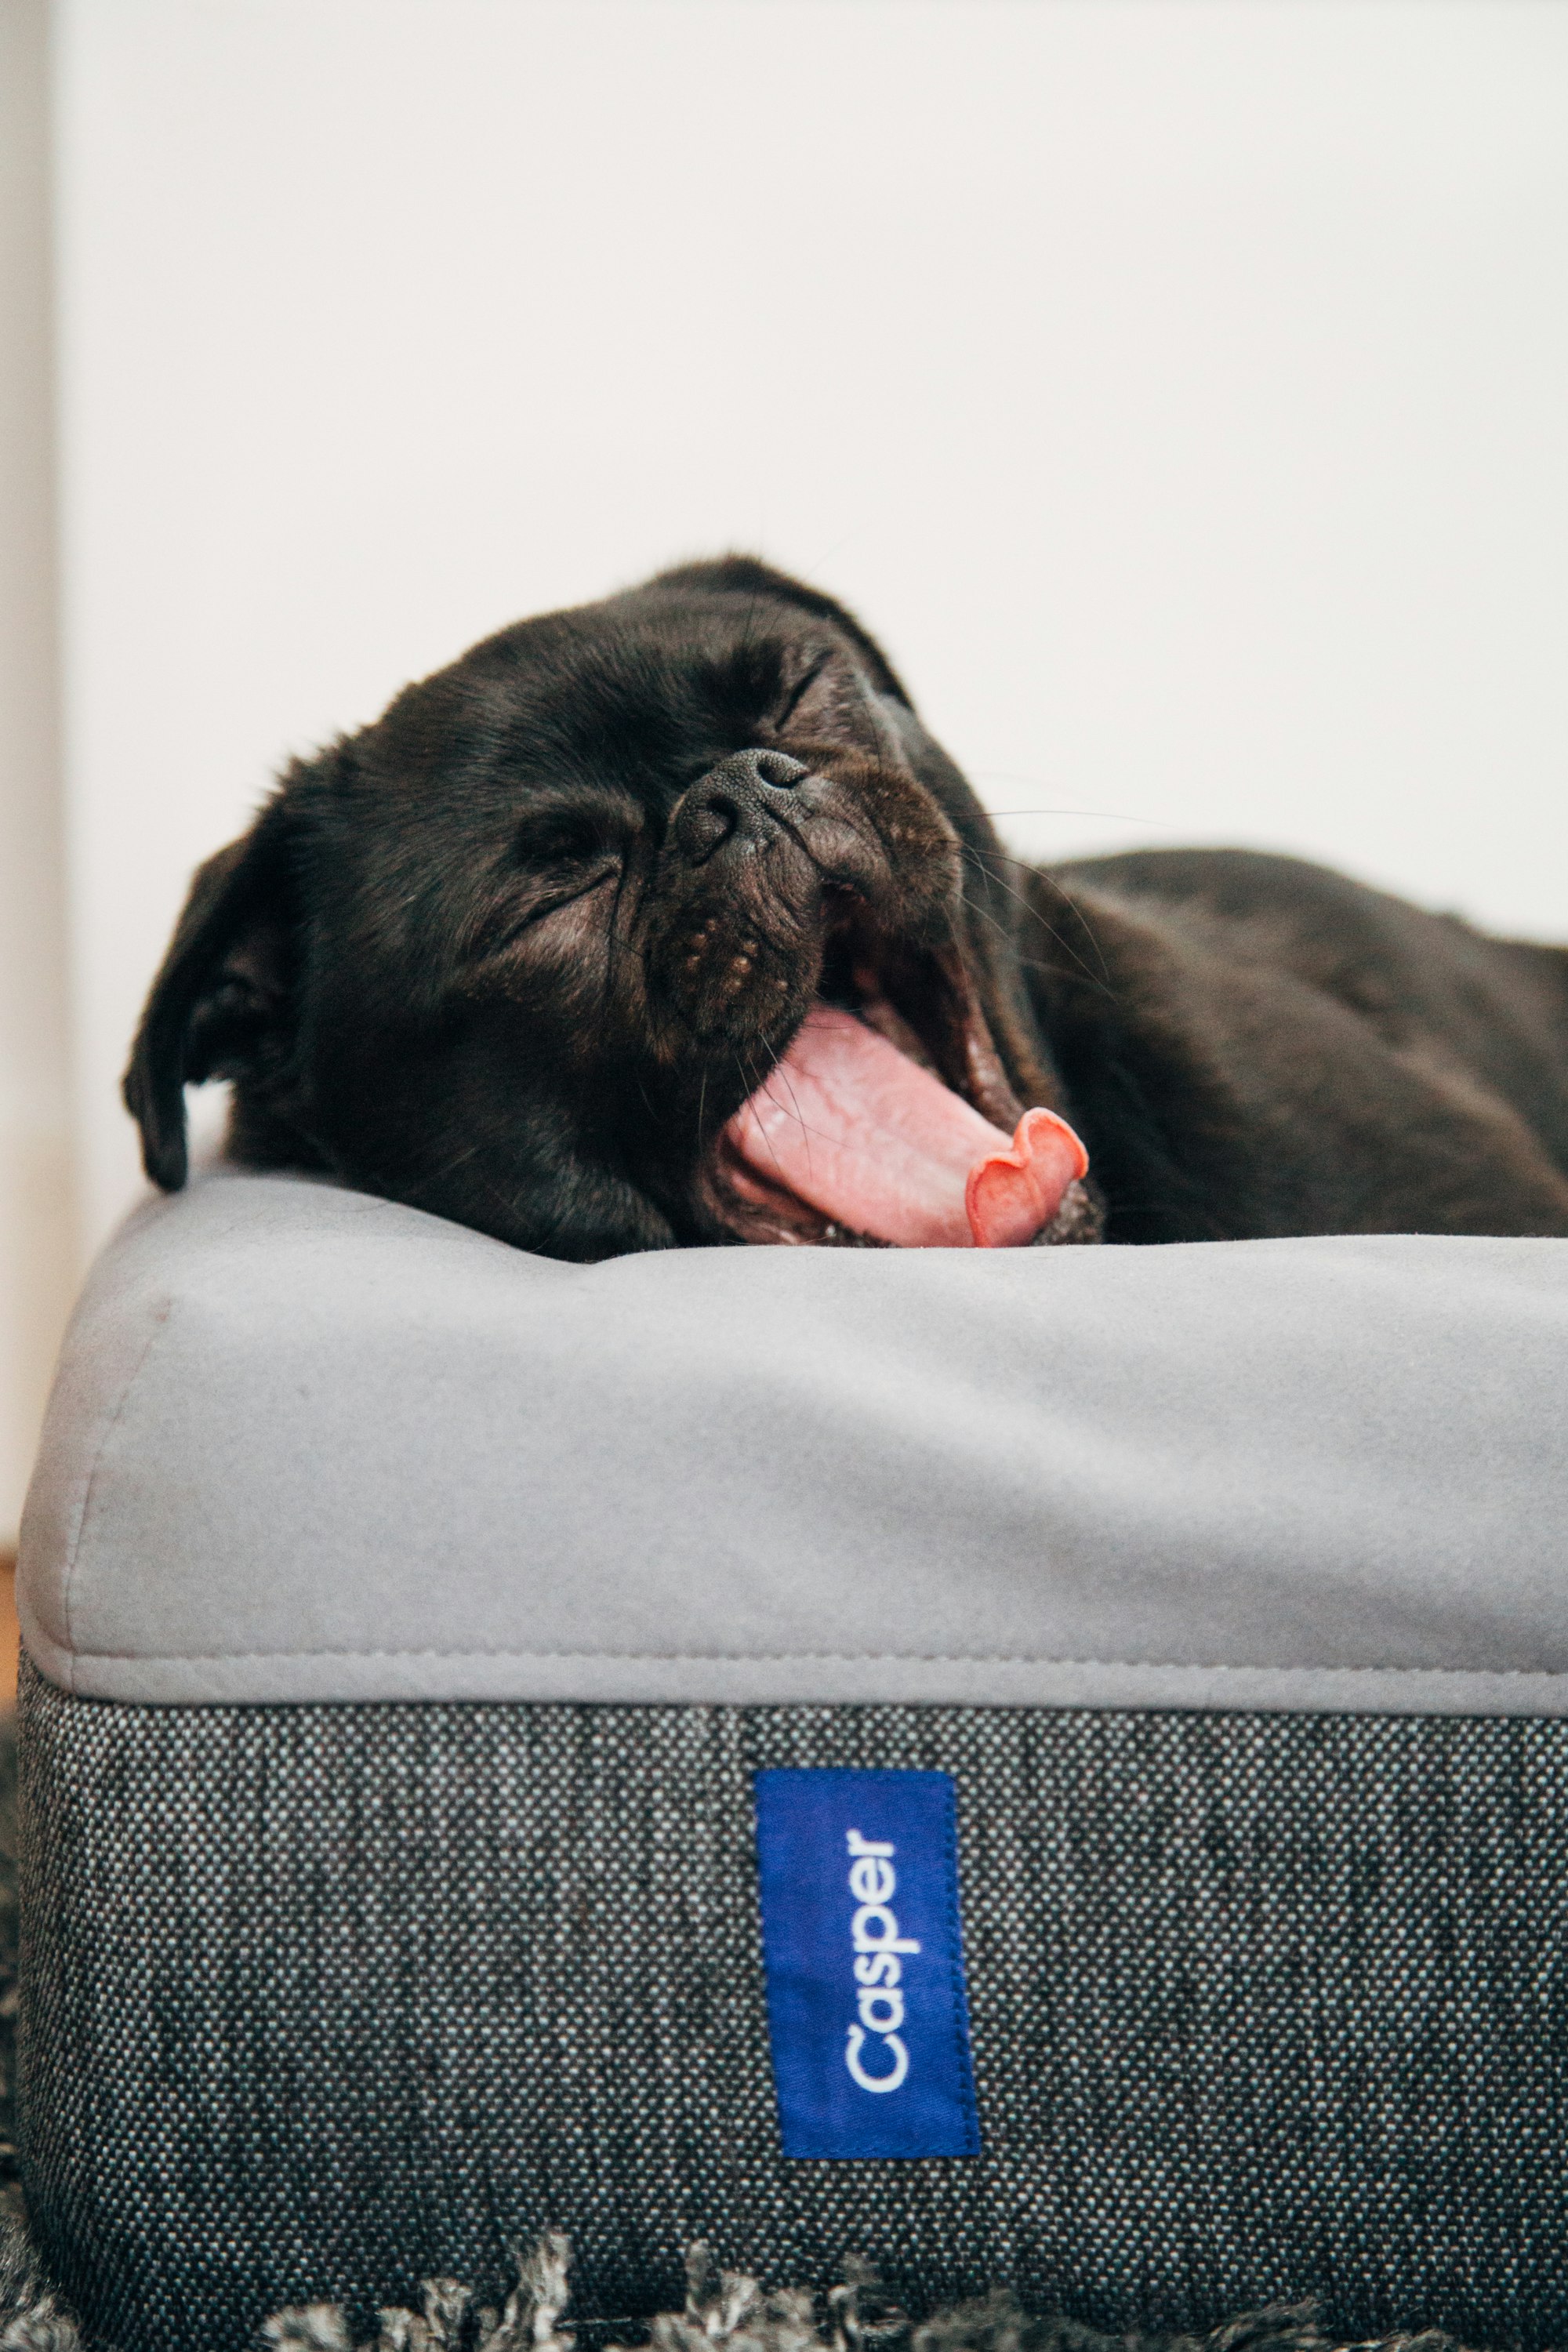 My black pug Toshi sleeping on his newly acquired Casper mattress bed.